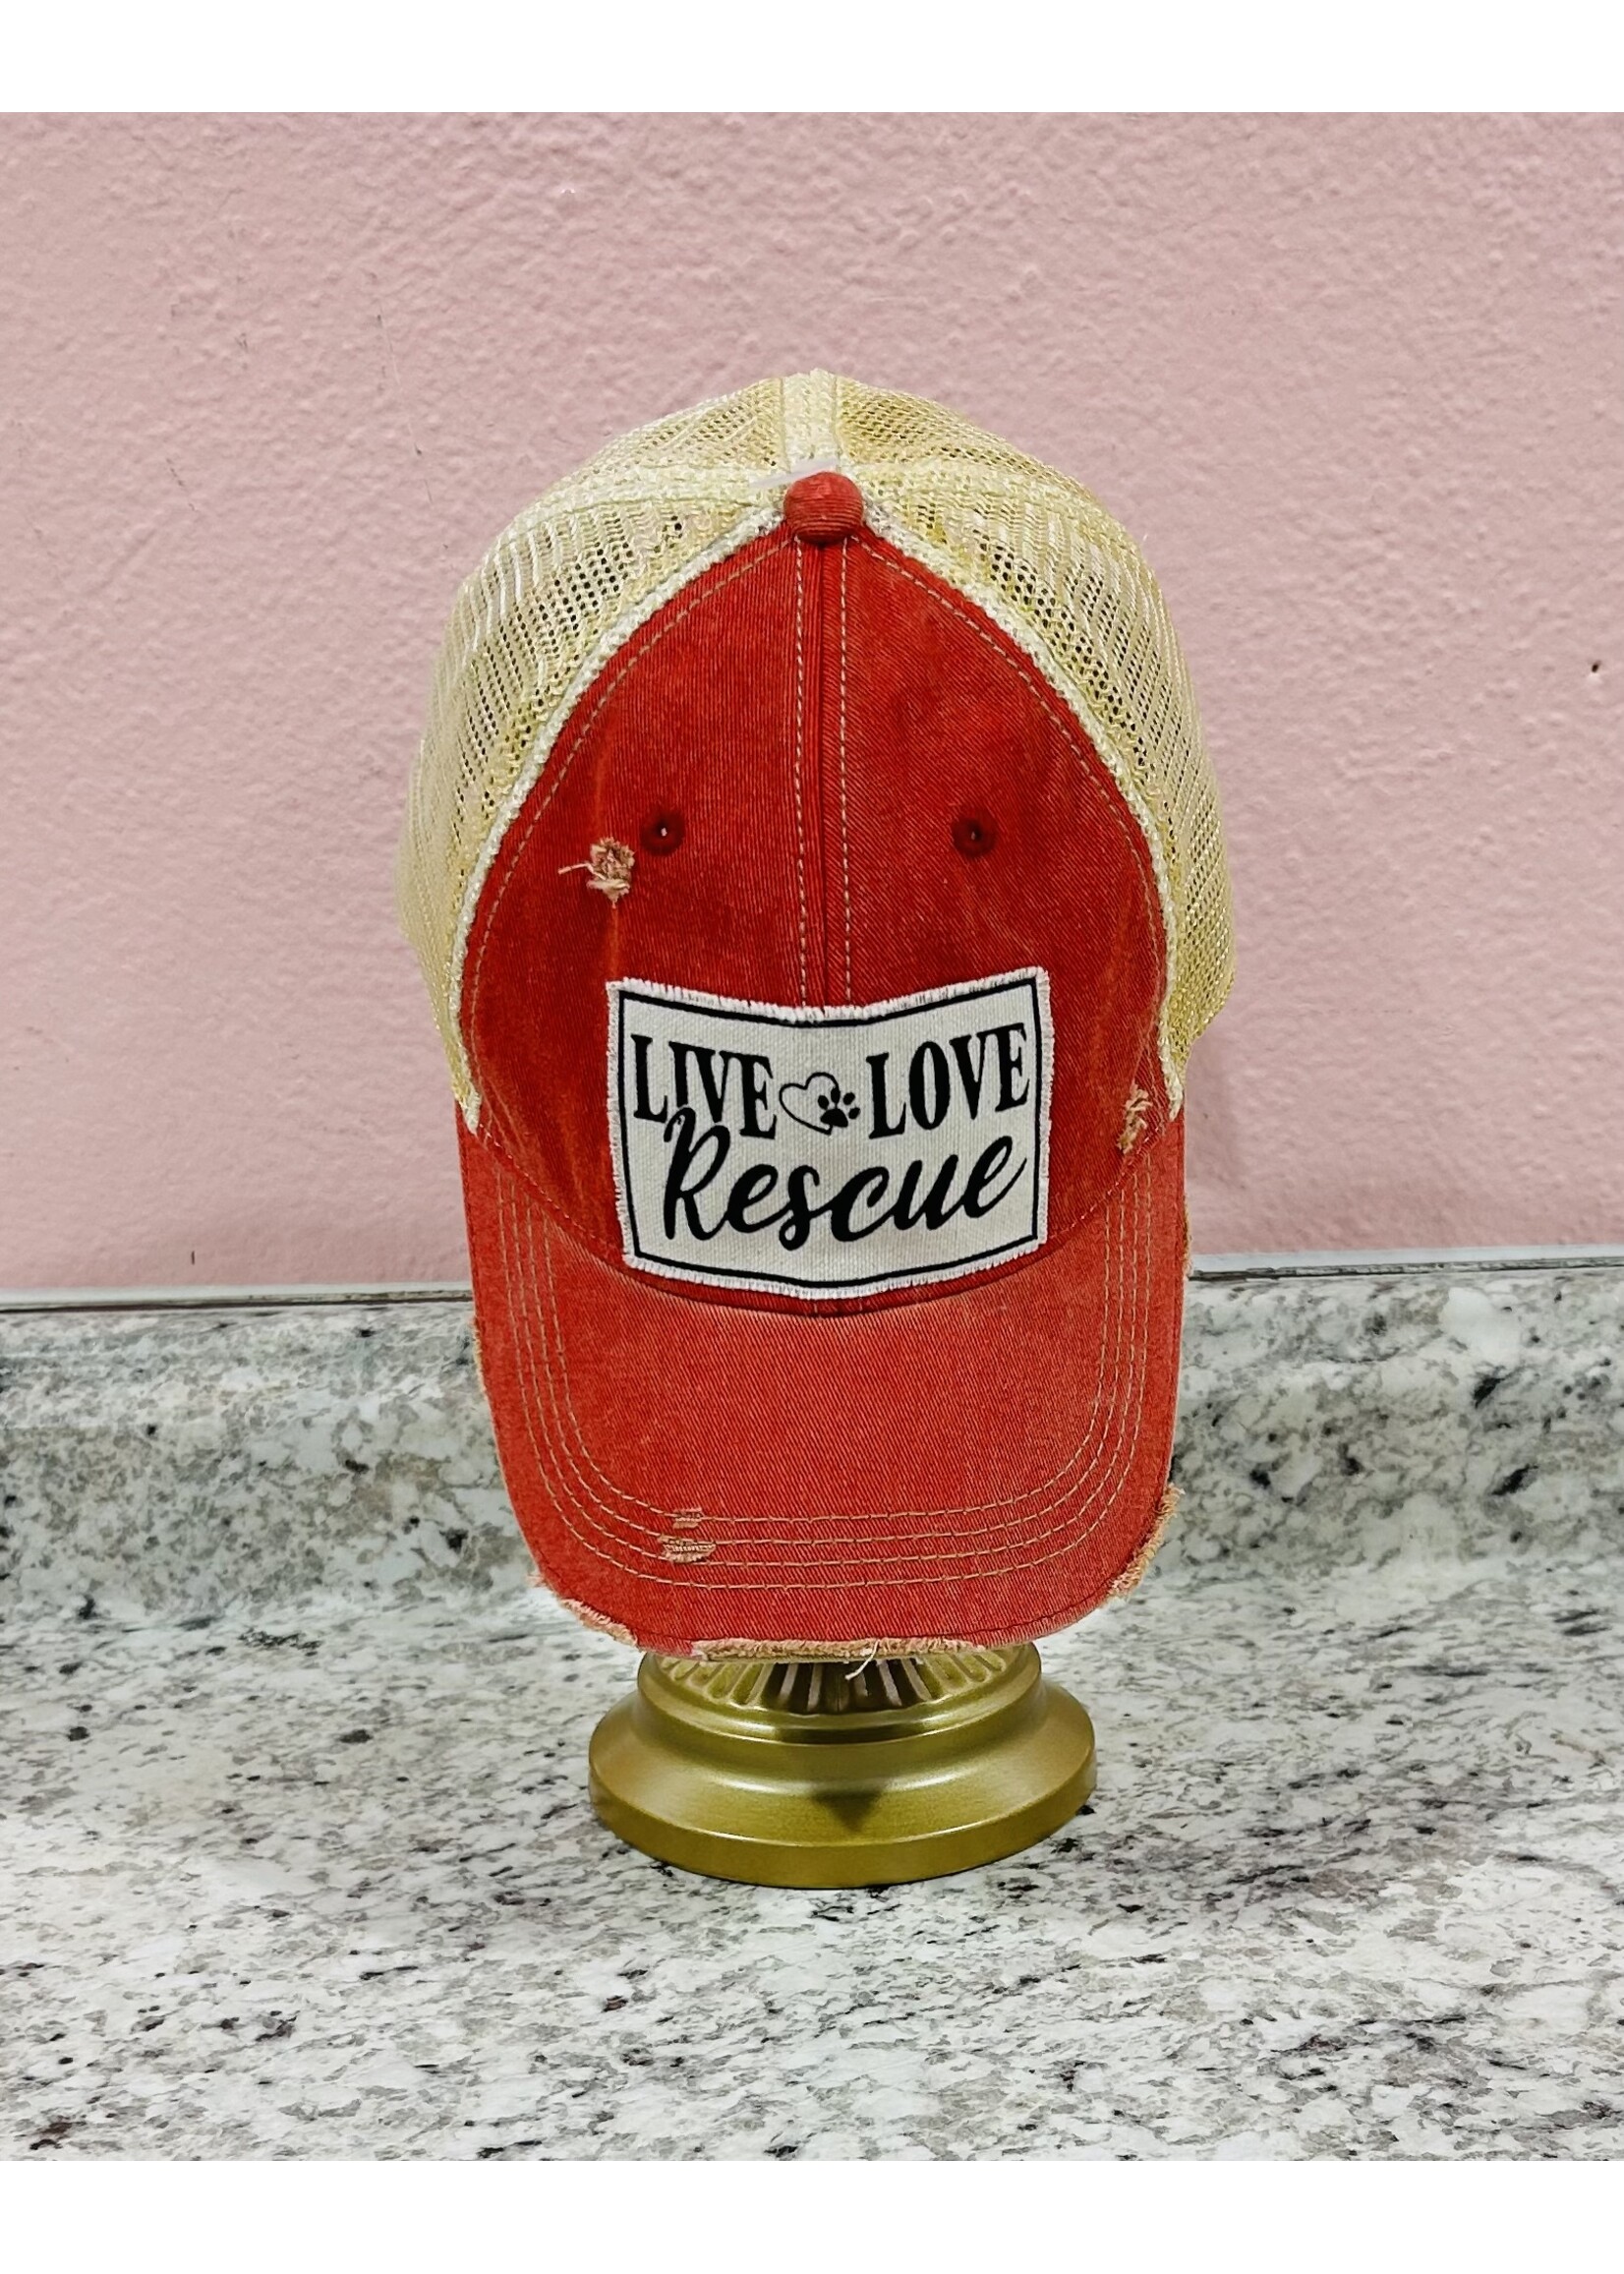 Vintage Life Live Love Rescue Distressed Trucker Hat